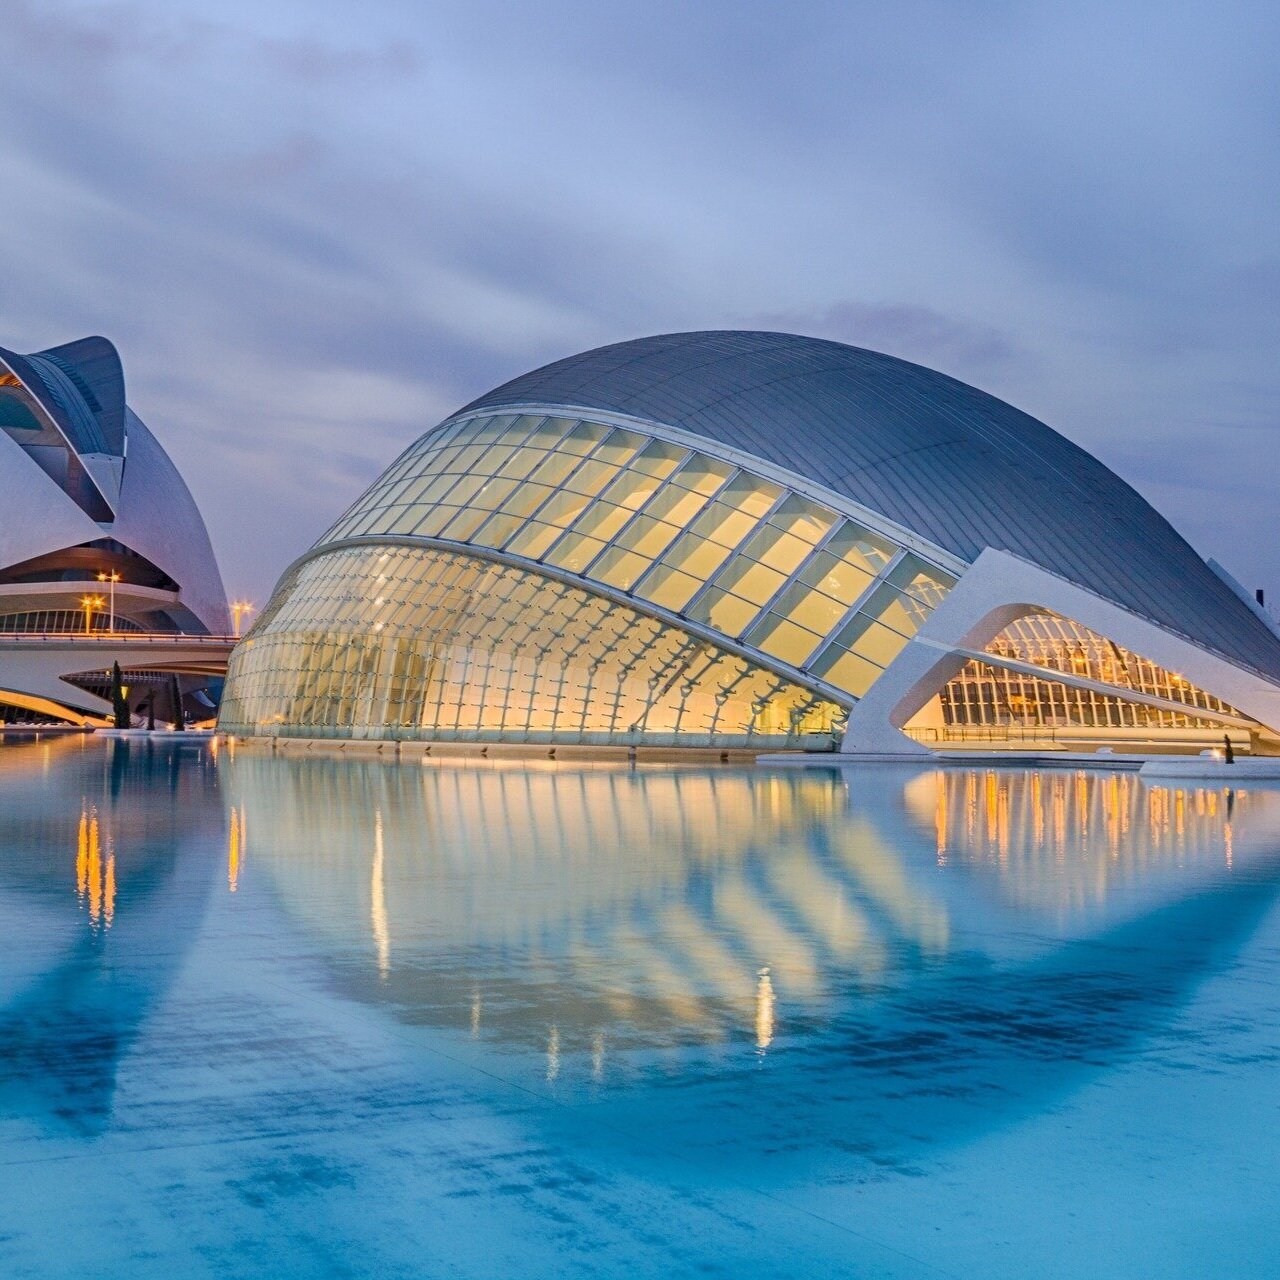 Valencia Science Park. Photo by Anonymous on Pixabay